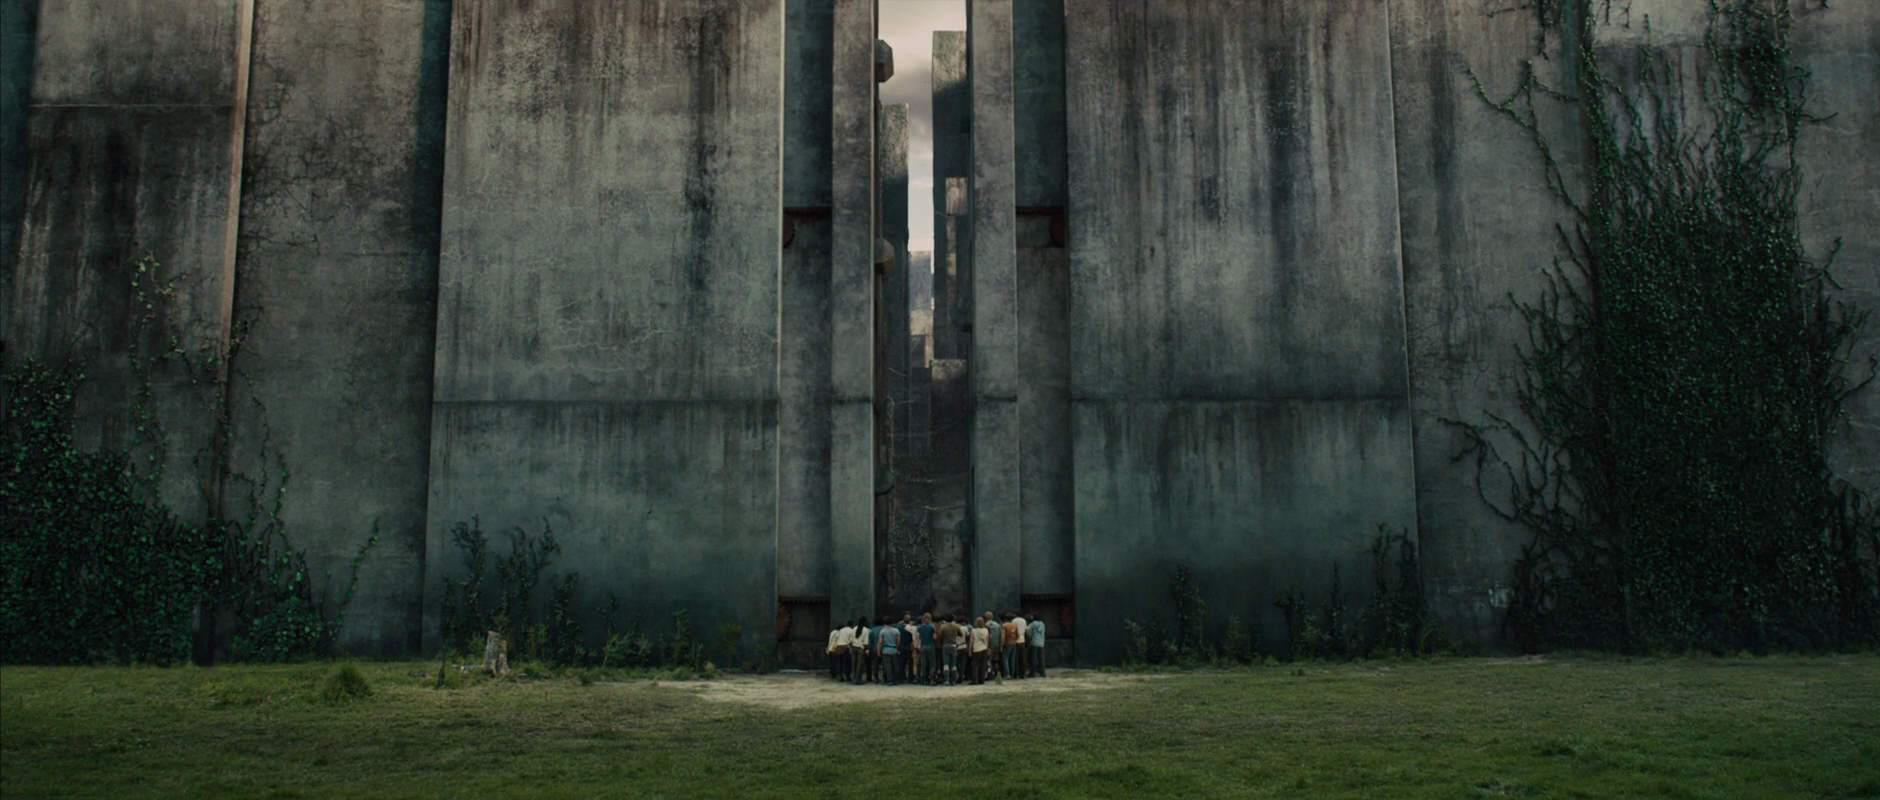 Entering the maze in The Maze Runner (2014)